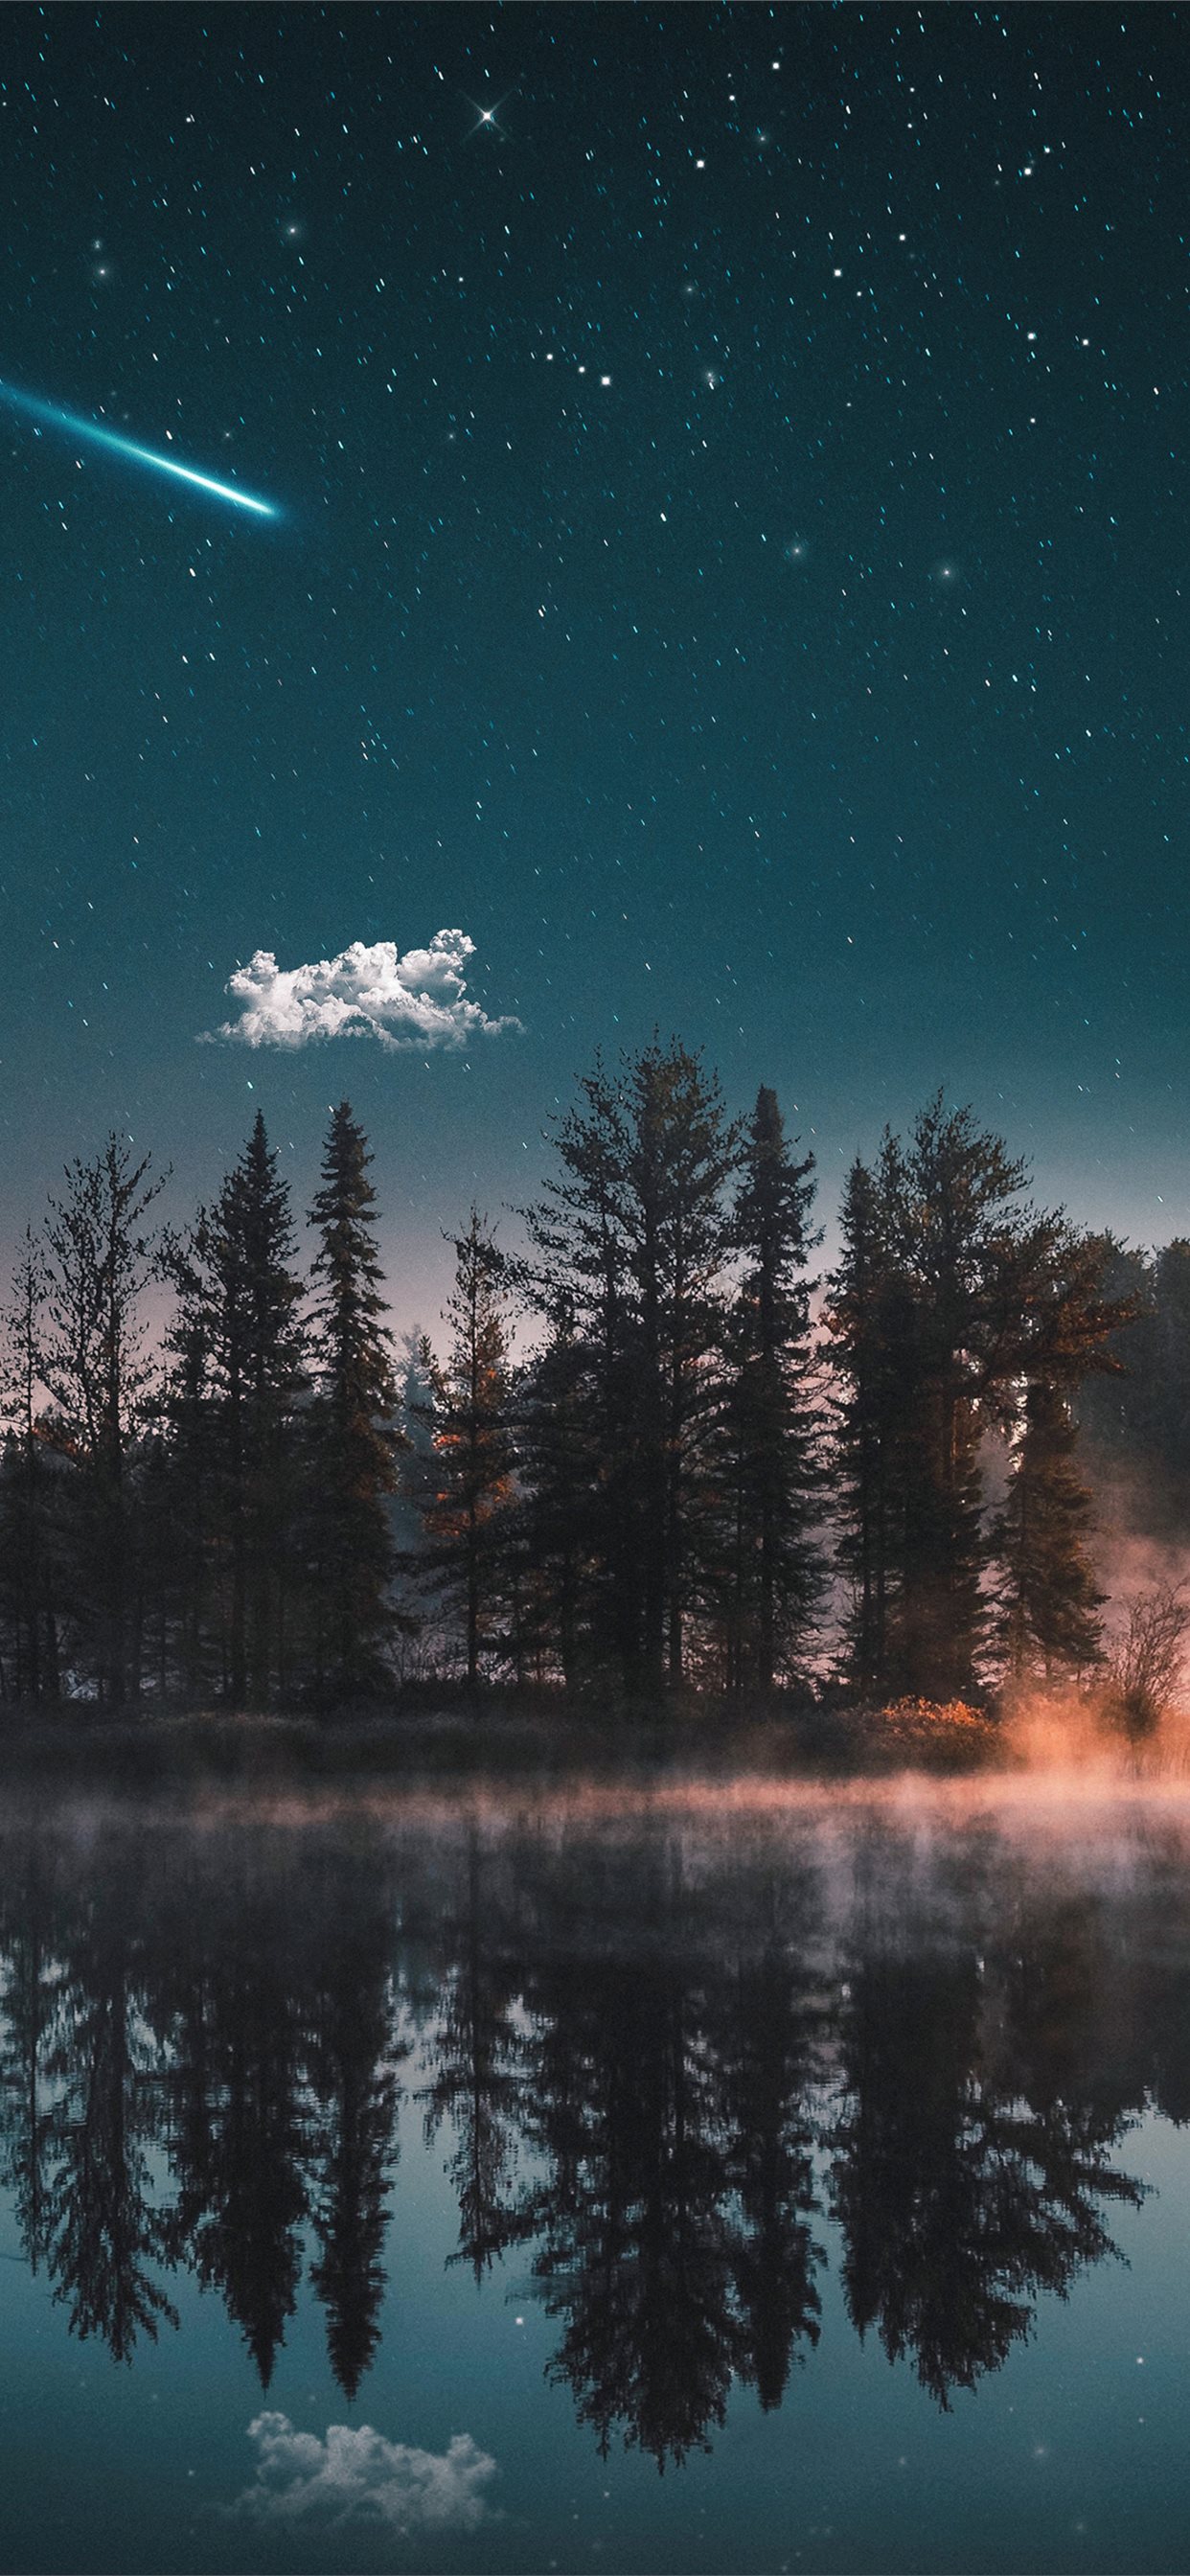 Dreamy Photos Download The BEST Free Dreamy Stock Photos  HD Images